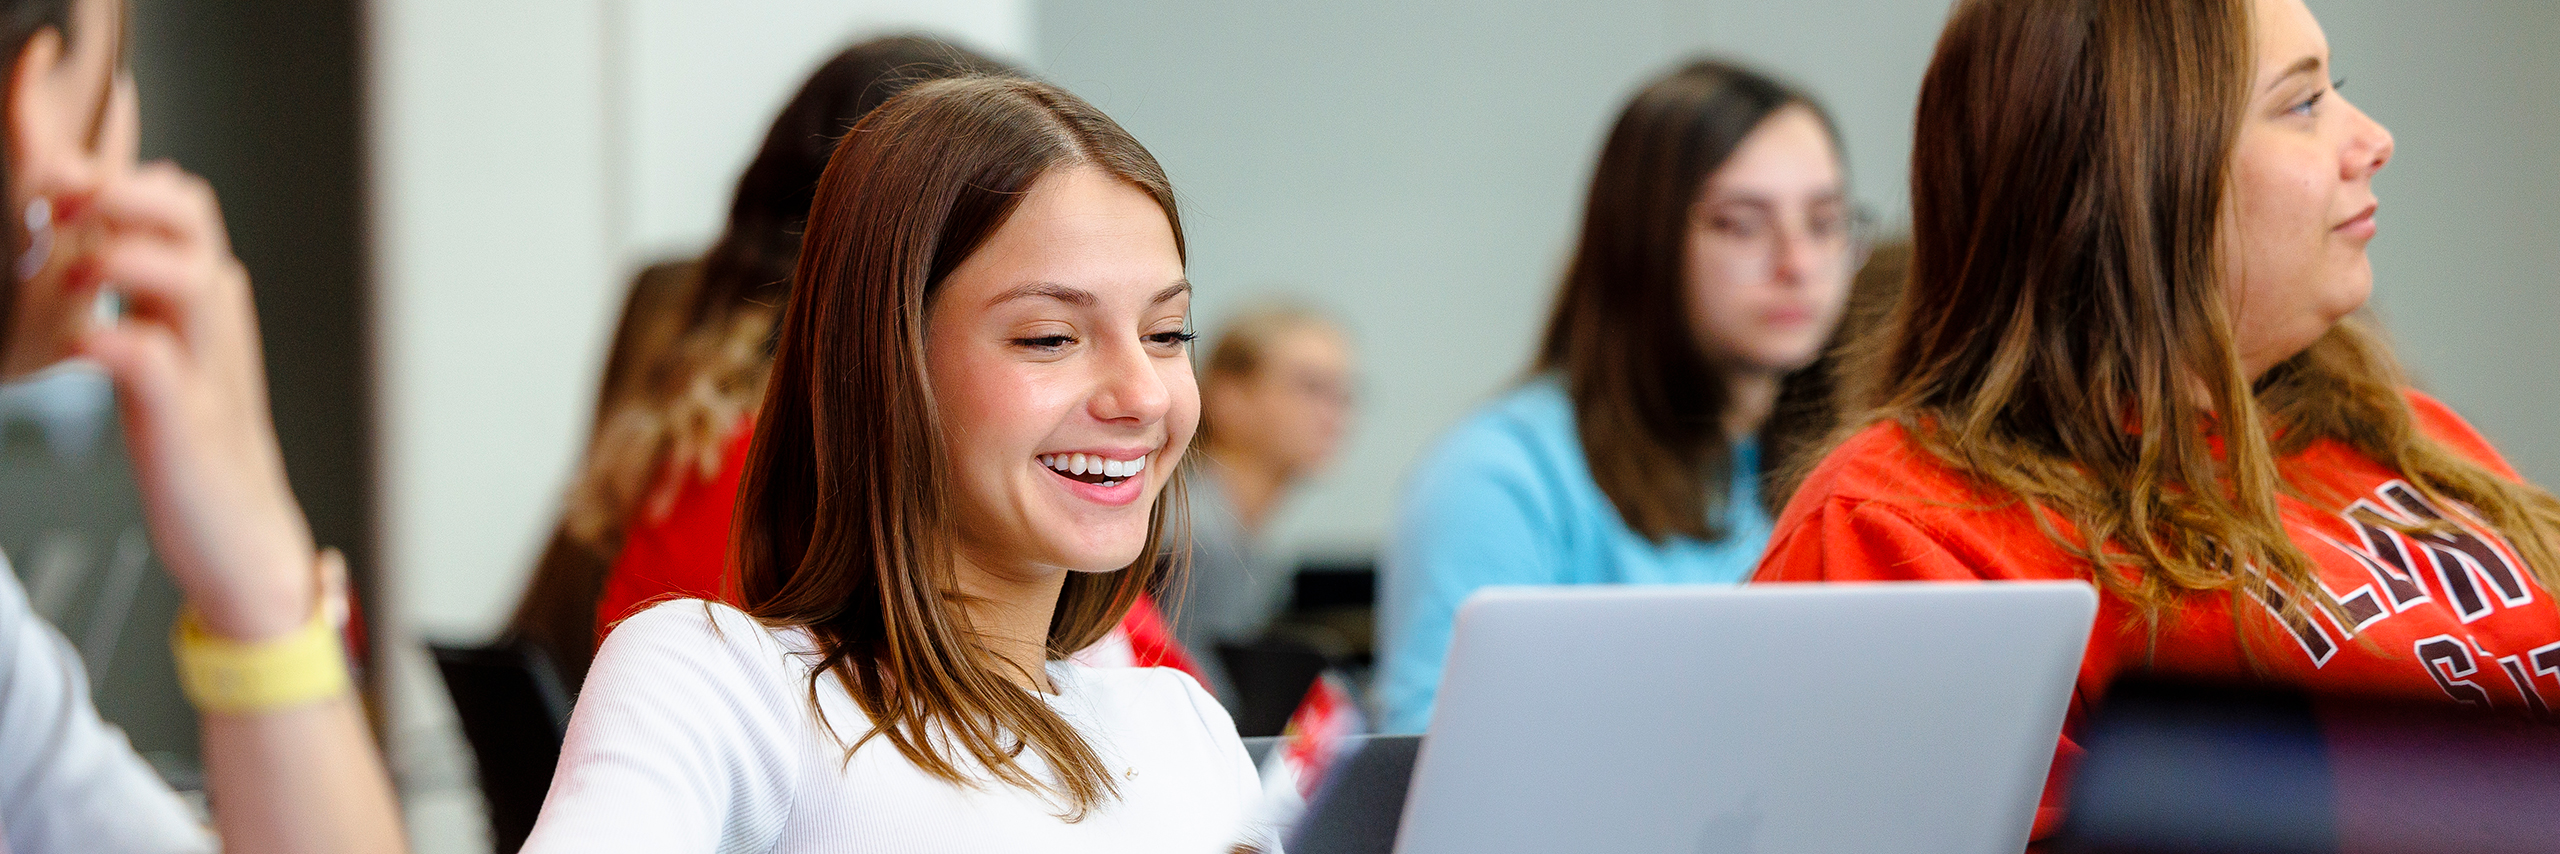 Student looking to a laptop screen and smiling in classroom.